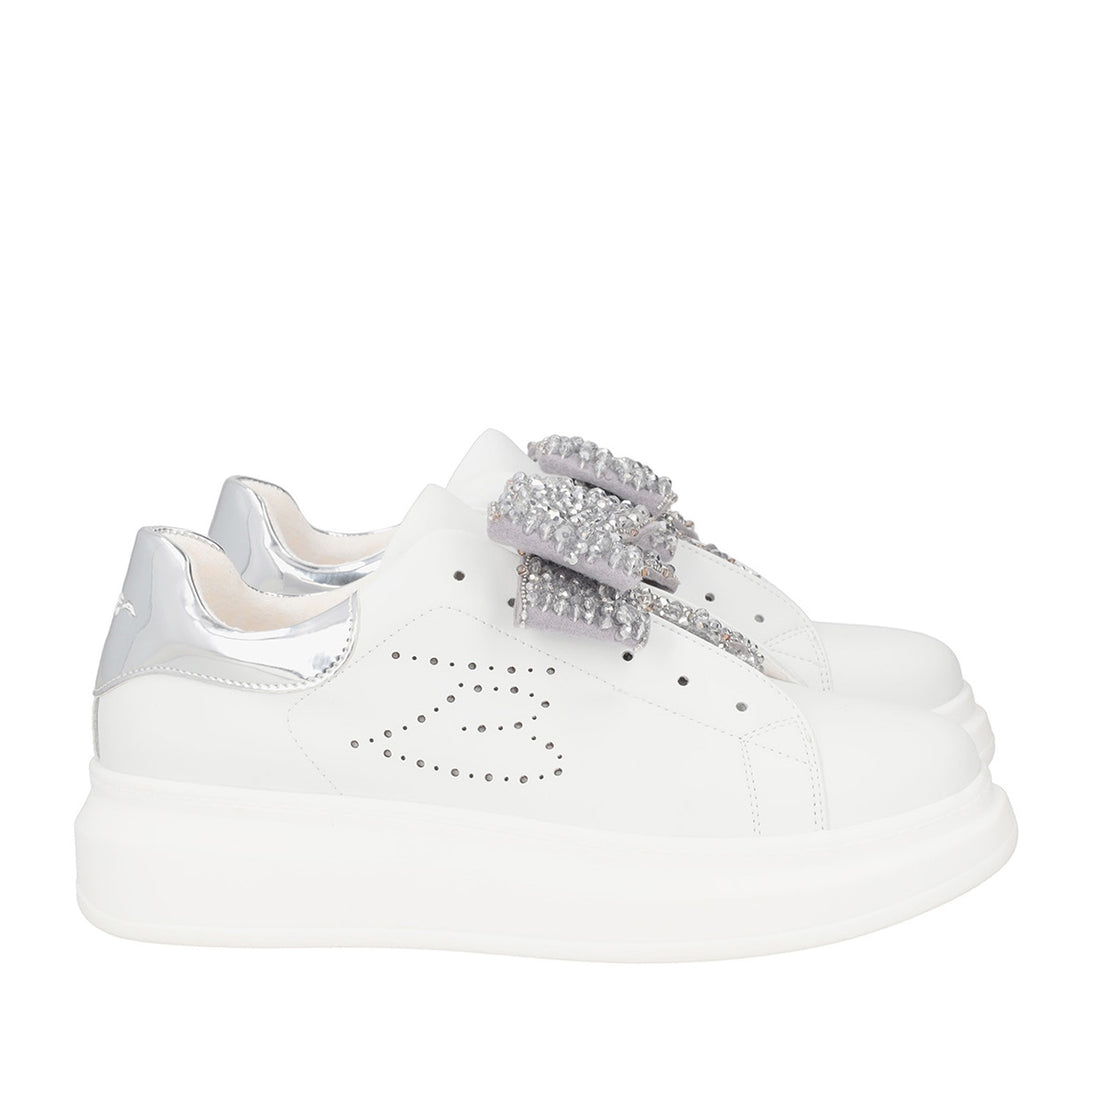 WHITE/SILVER GLAMOUR SNEAKER WITH RHINESTONE BOW